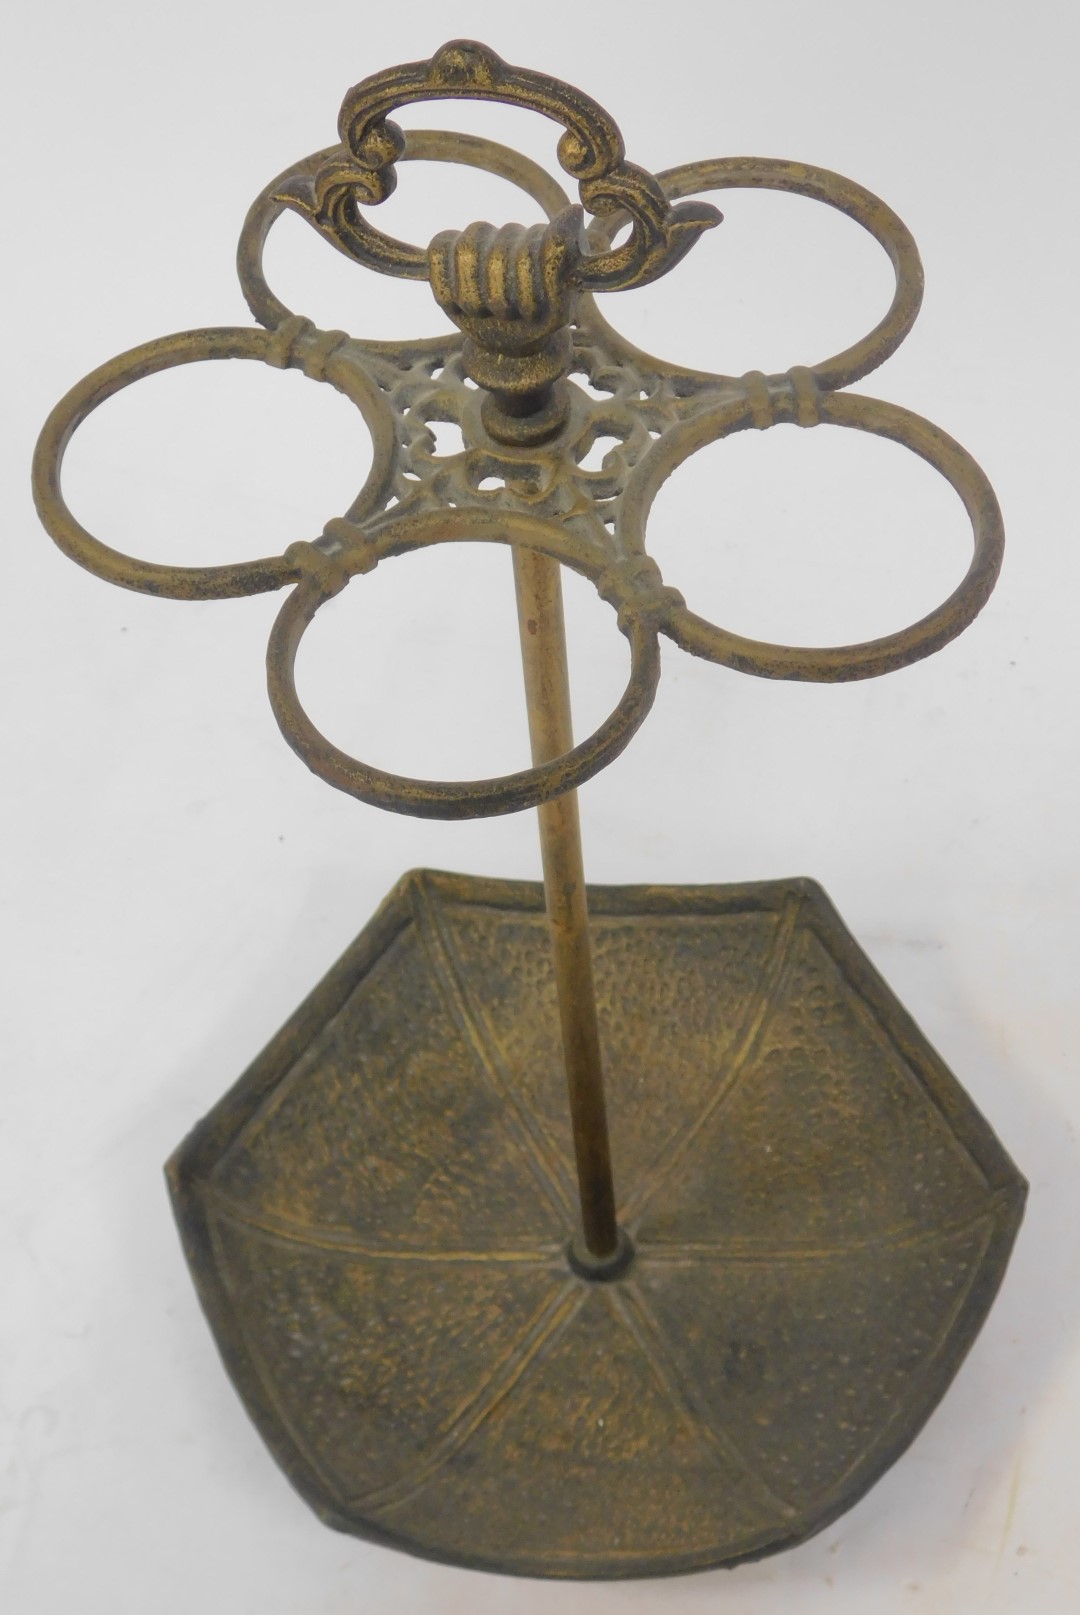 A 20thC cast iron umbrella stand, modelled as an upturned umbrella with five ring sections for - Image 2 of 2